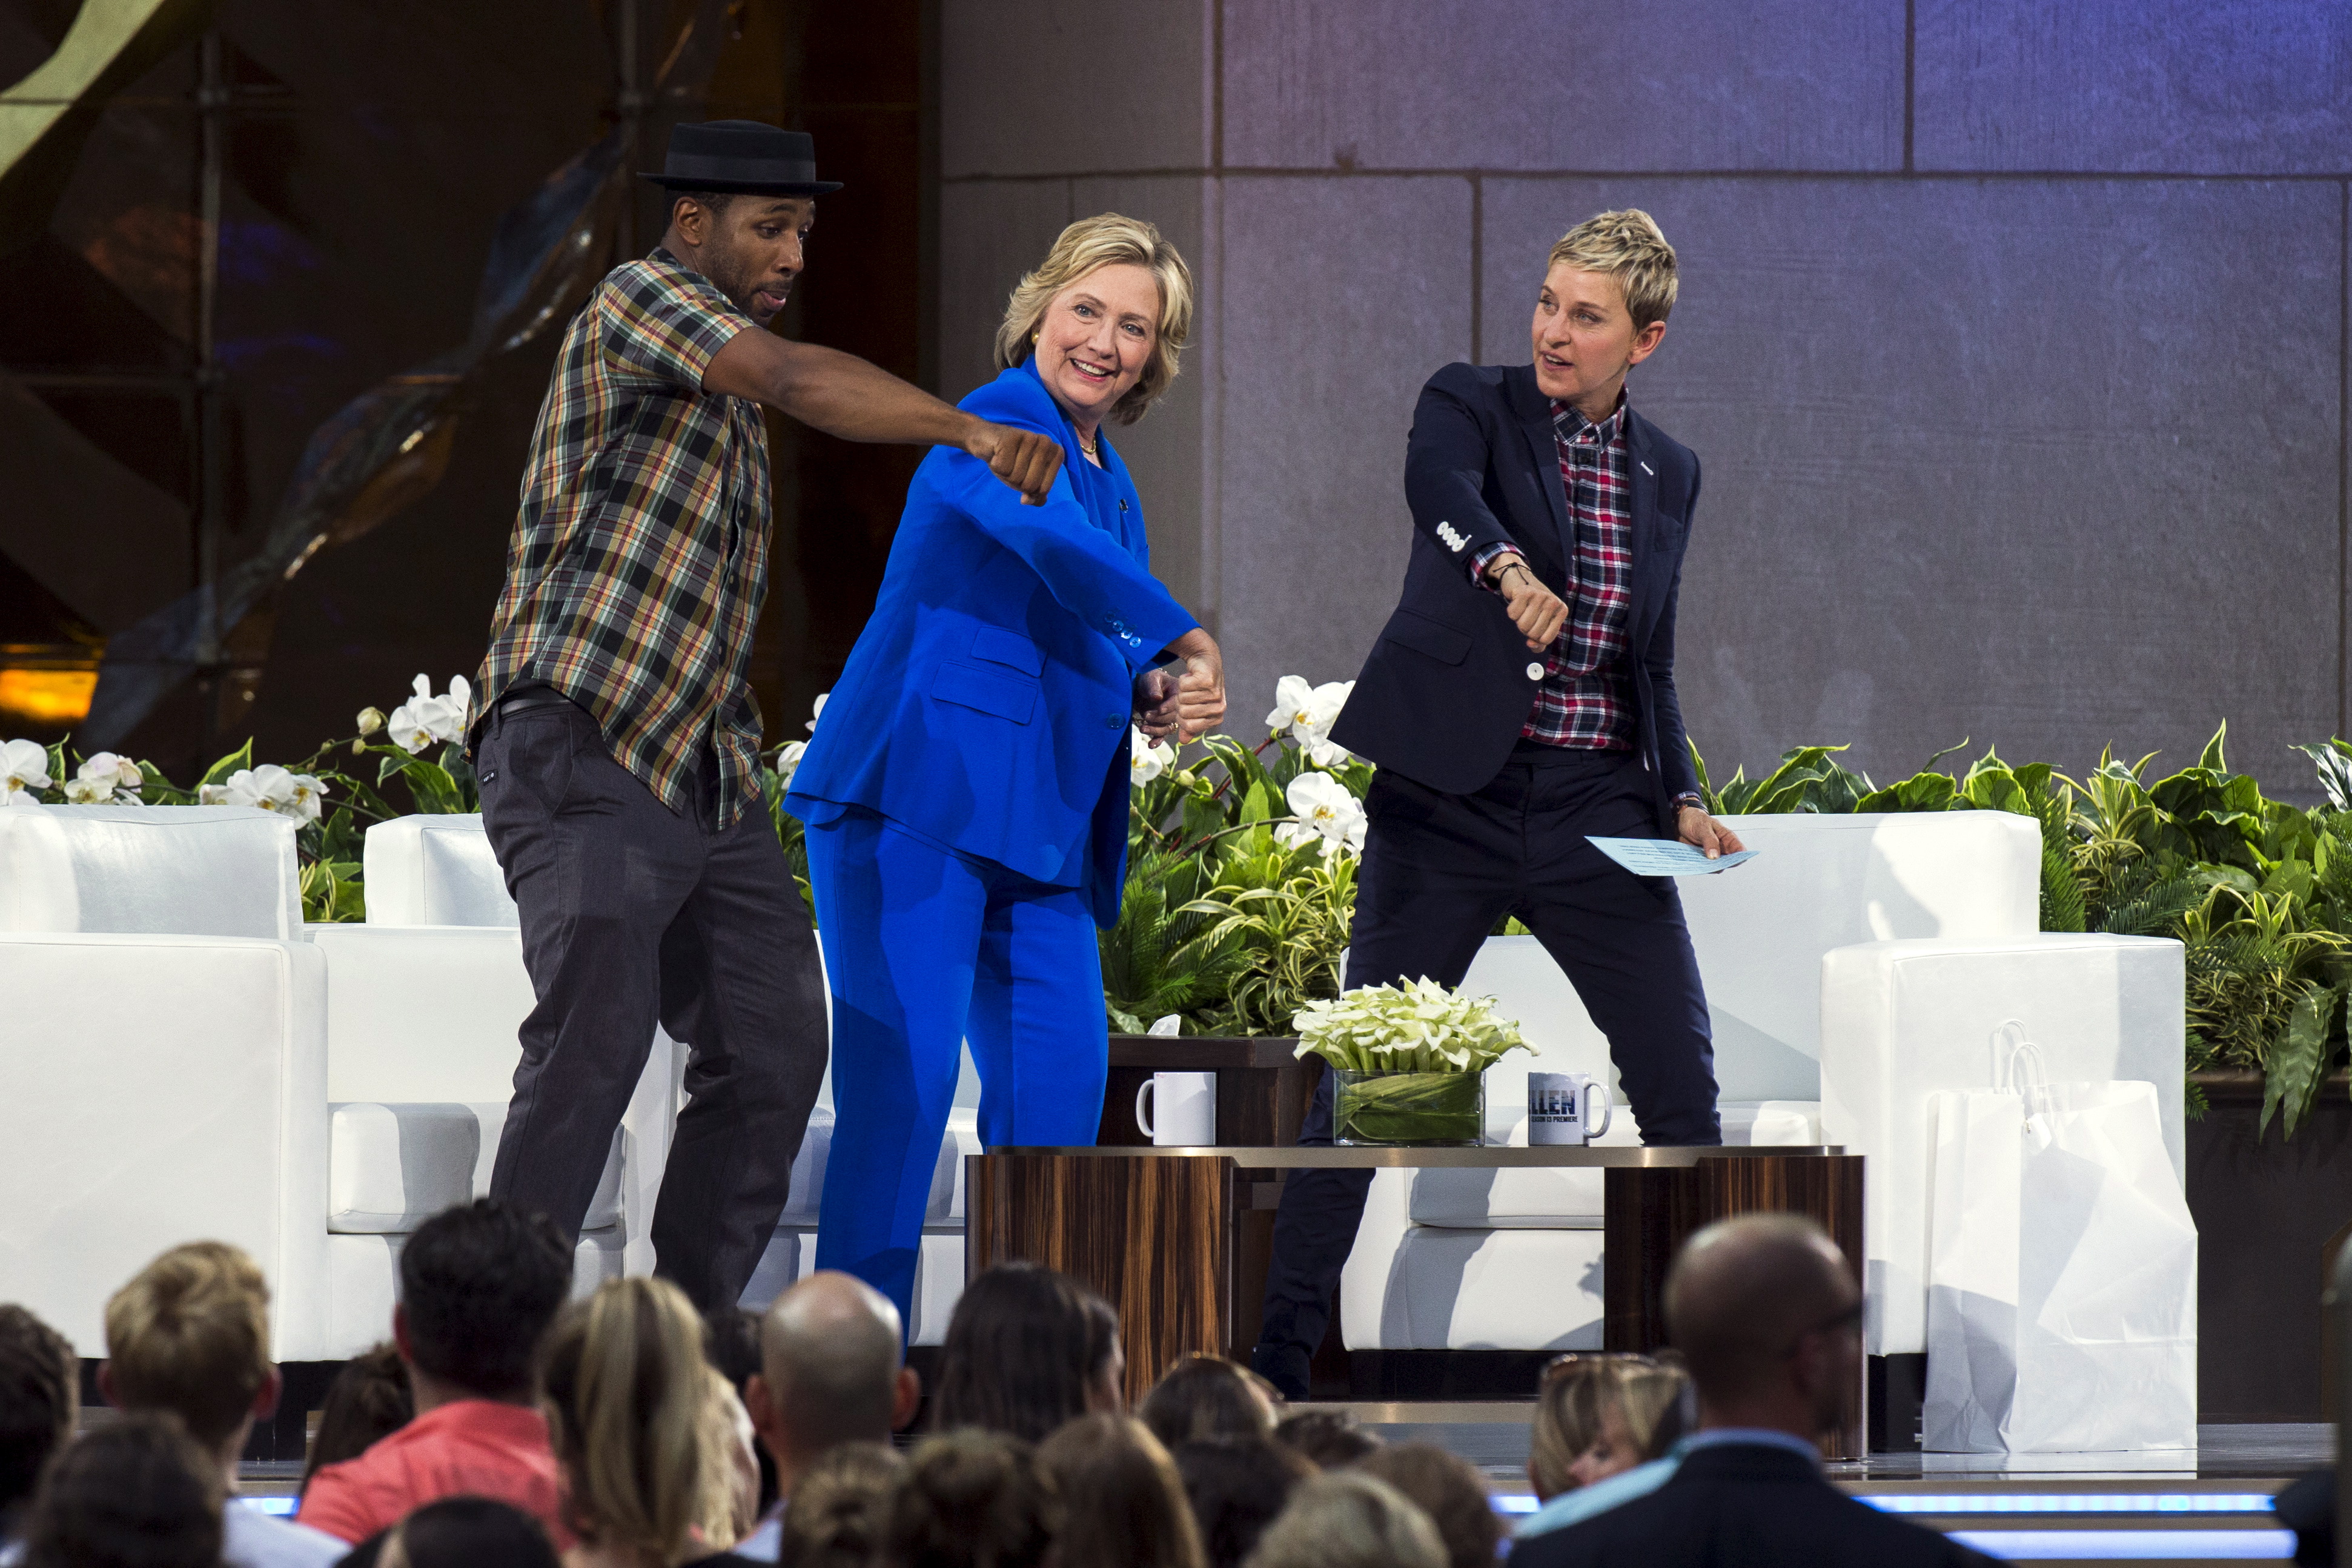 U.S. Democratic presidential candidate Hillary Clinton dances with DJ Stephen "Twitch" Boss, left, and television host Ellen DeGeneres, right, during a taping of <i>The Ellen DeGeneres Show</i> in New York Sept. 8, 2015 (Lucas Jackson—Reuters)